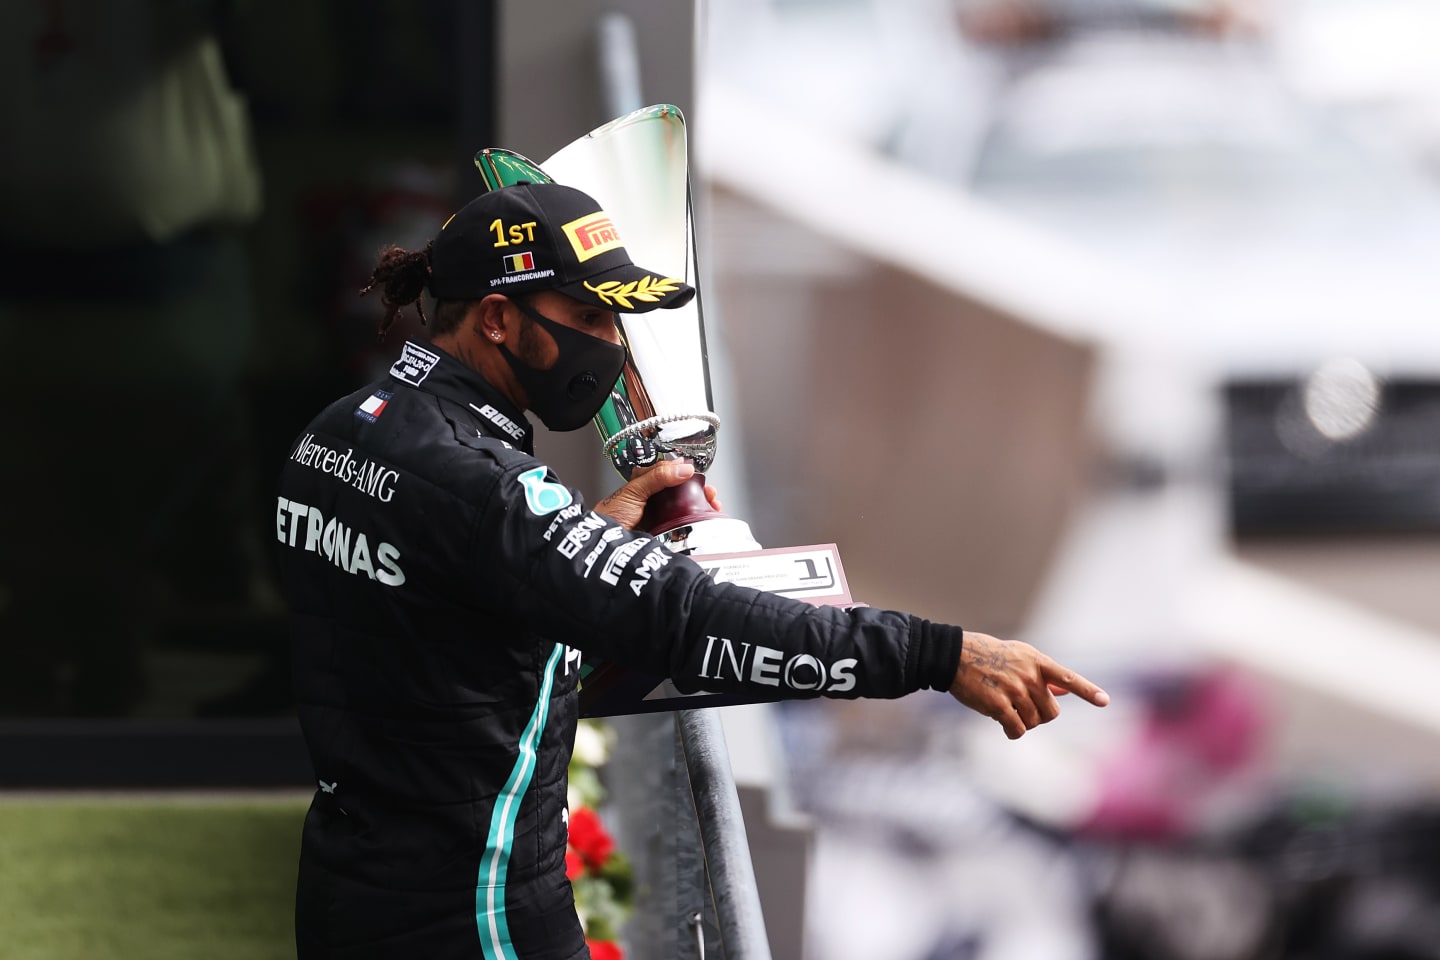 SPA, BELGIUM - AUGUST 30: Race winner Lewis Hamilton of Great Britain and Mercedes GP celebrates on the podium during the F1 Grand Prix of Belgium at Circuit de Spa-Francorchamps on August 30, 2020 in Spa, Belgium. (Photo by Lars Baron/Getty Images)